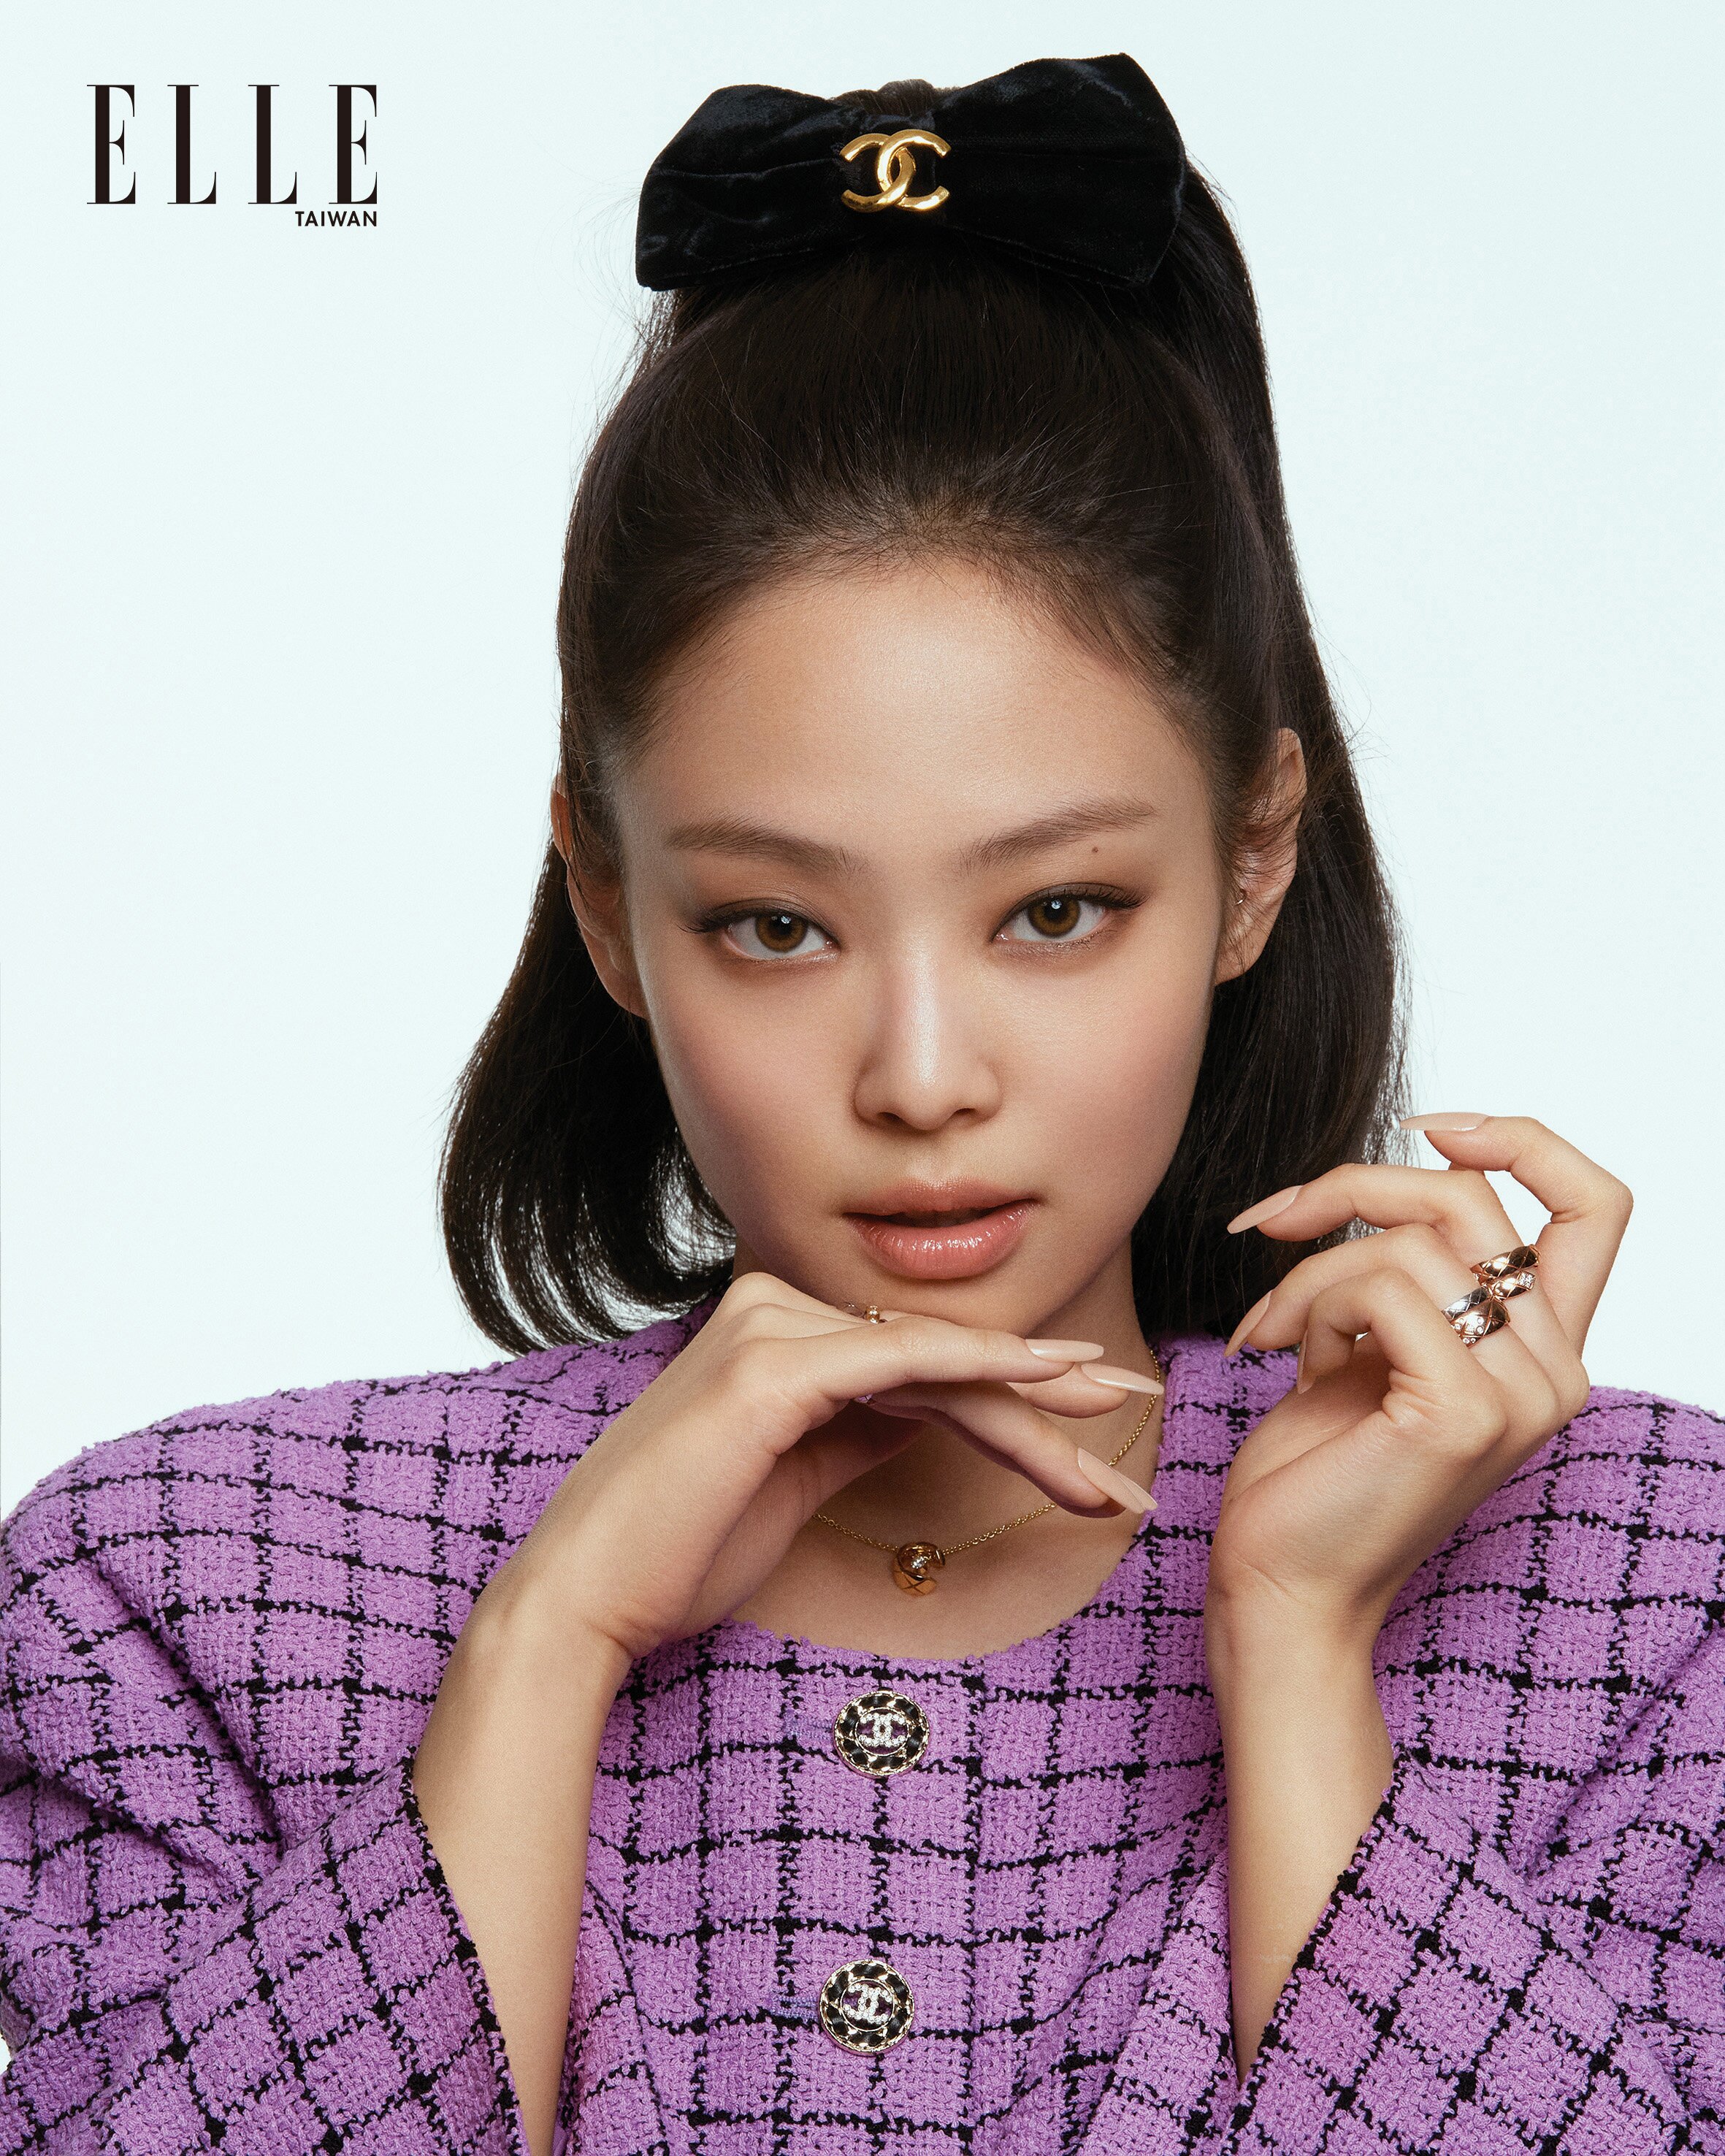 BLACKPINK Jennie for ELLE Magazine February 2022 Issue x Chanel